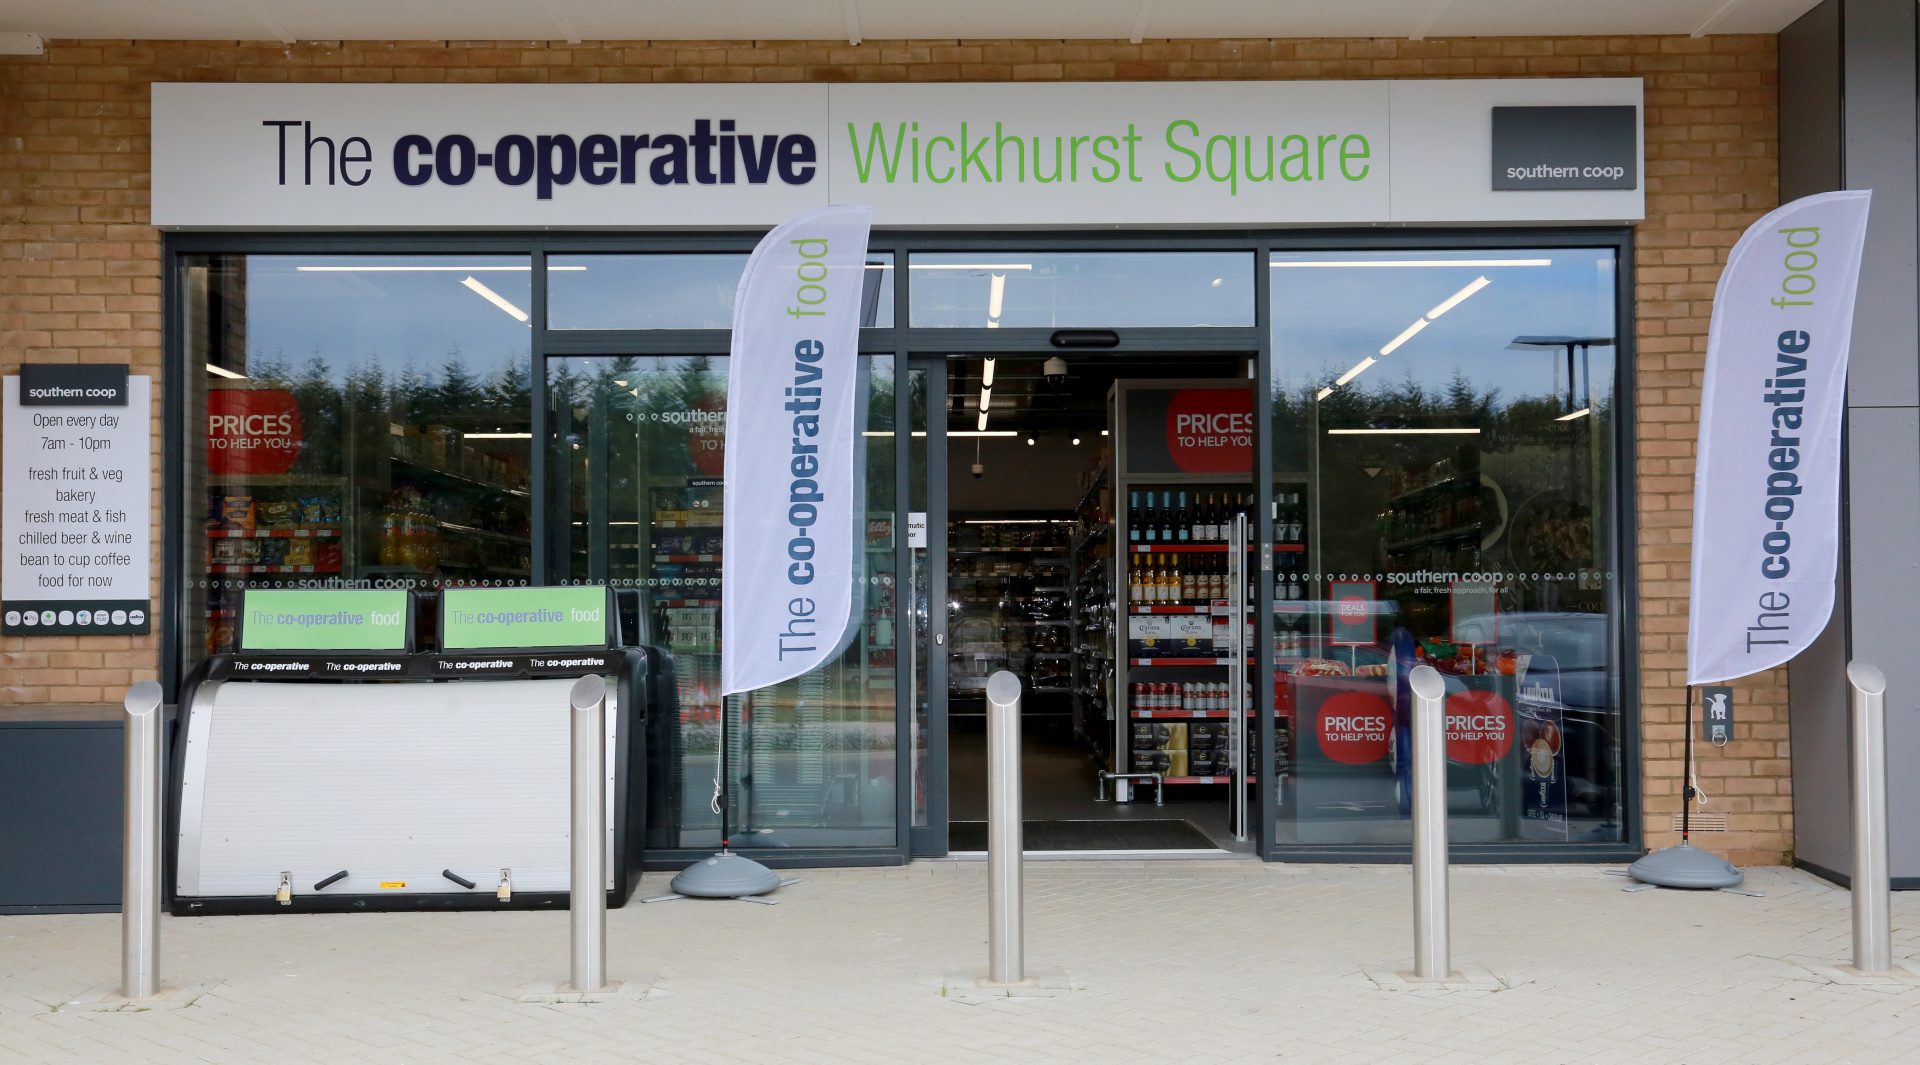 Photos showing the finished Co-op ready for opening